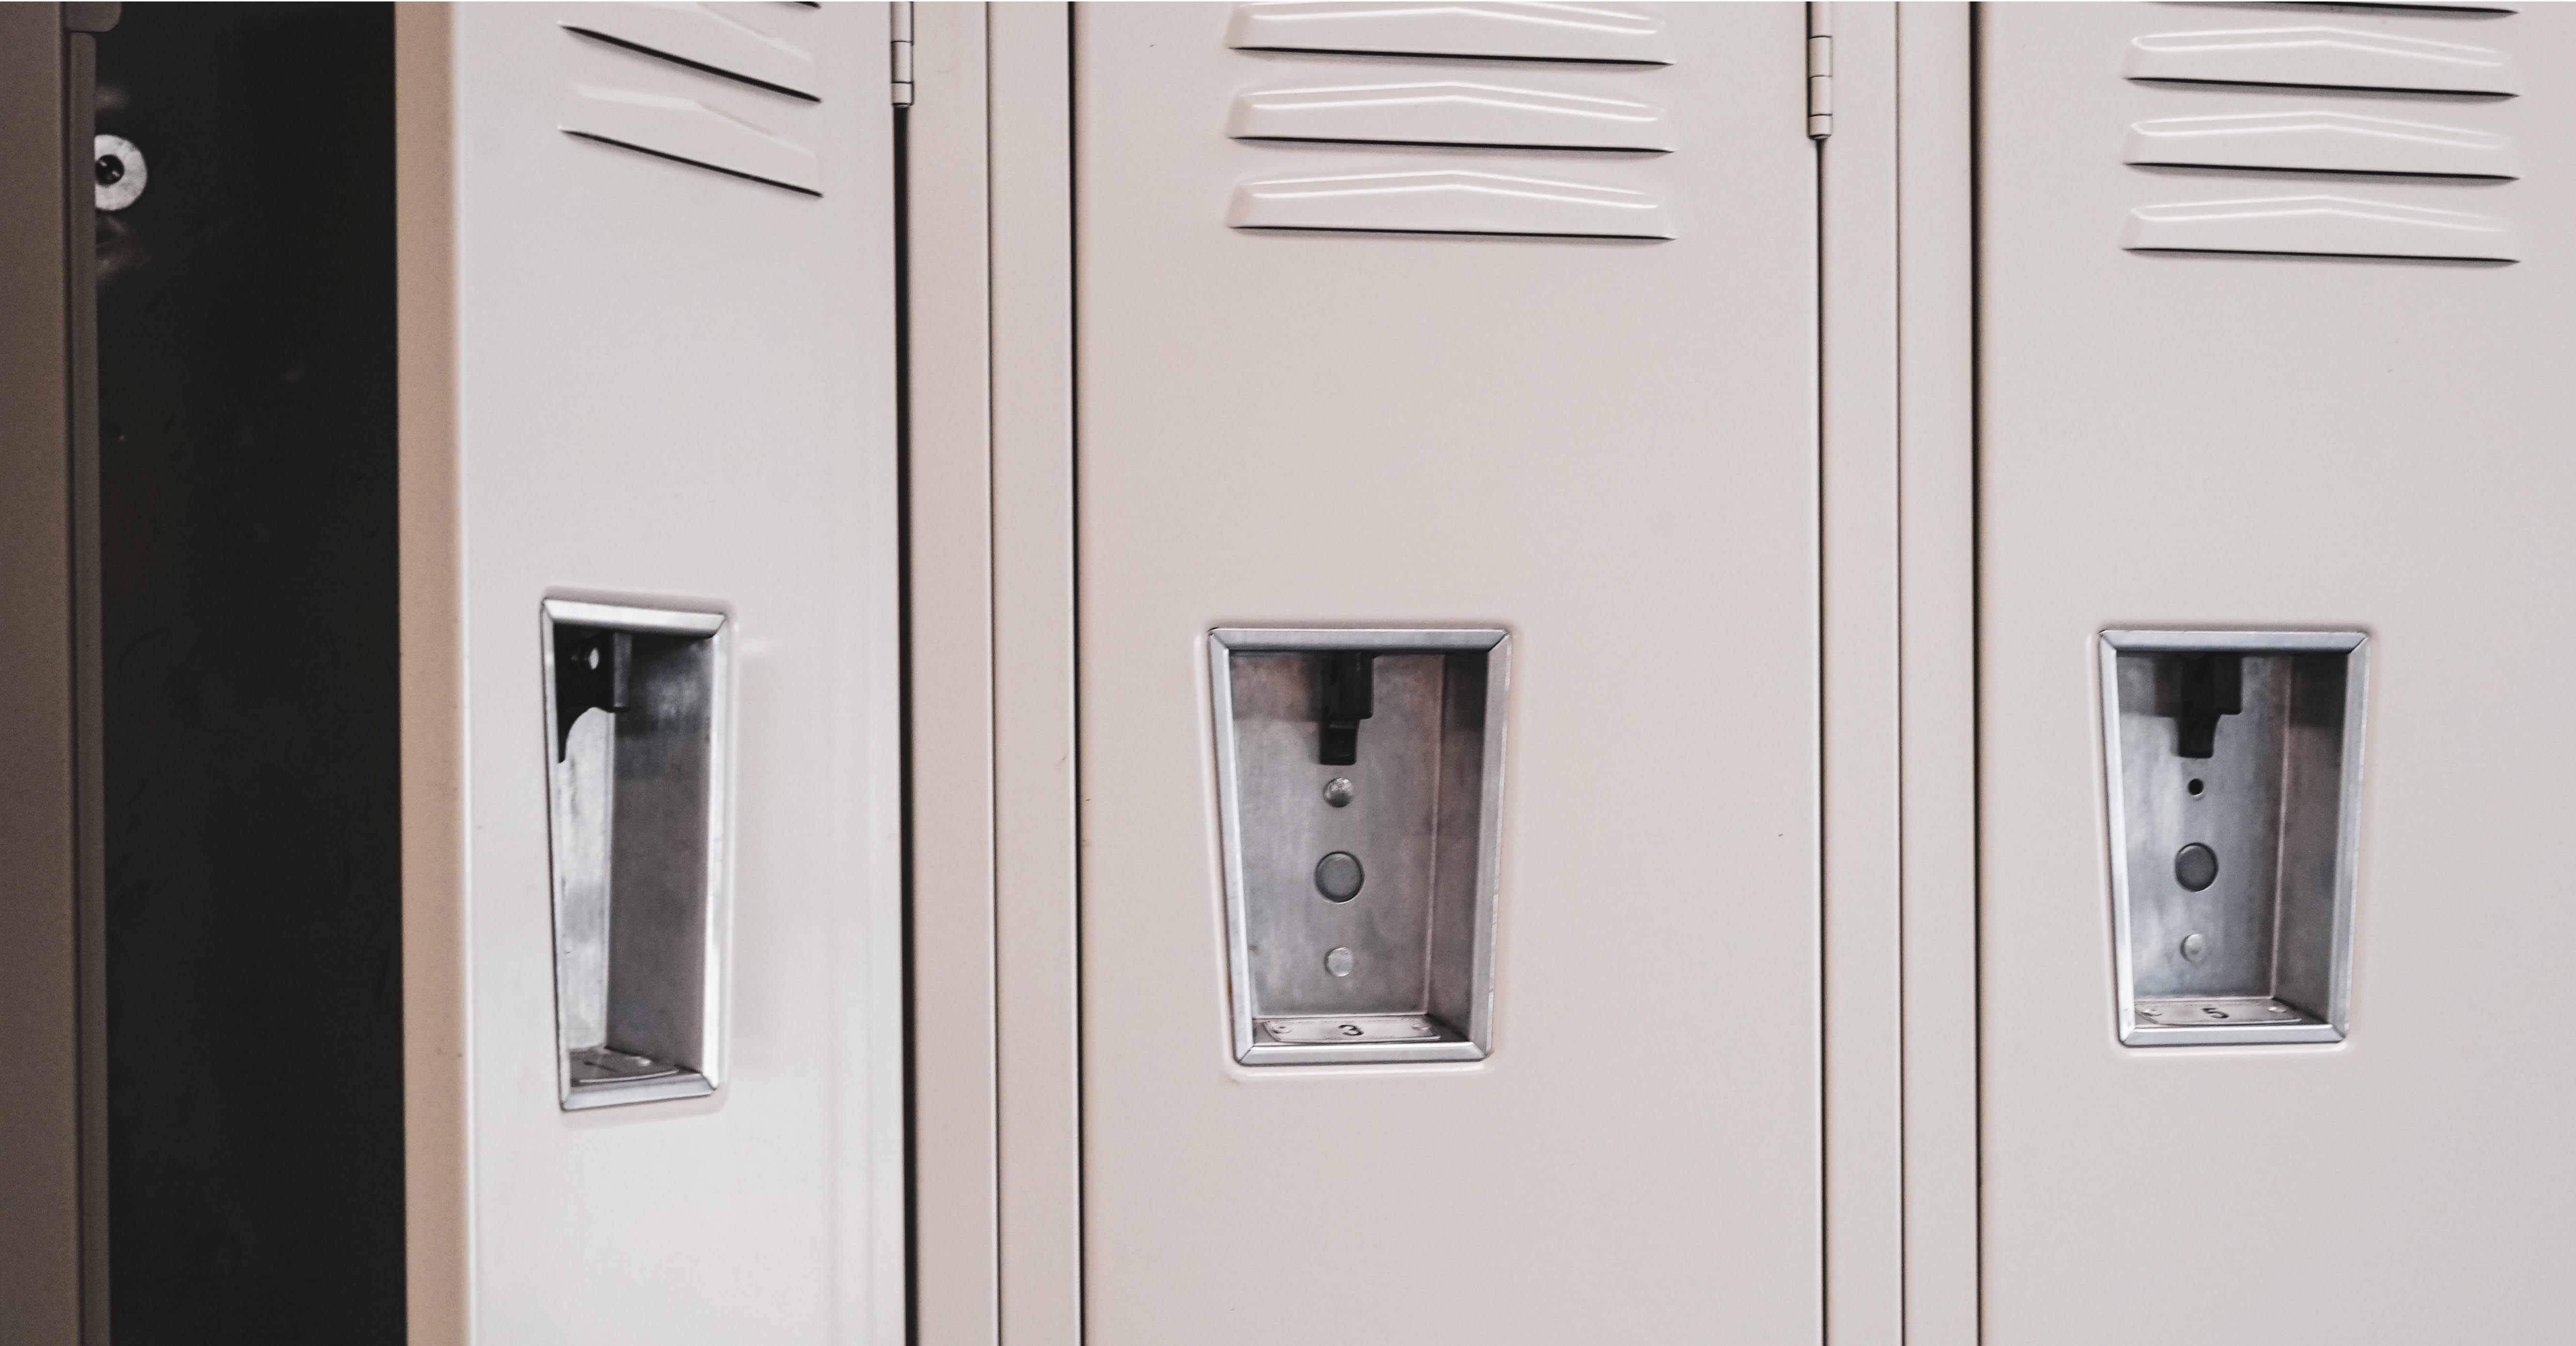 Three school lockers, with the first locker hanging open.